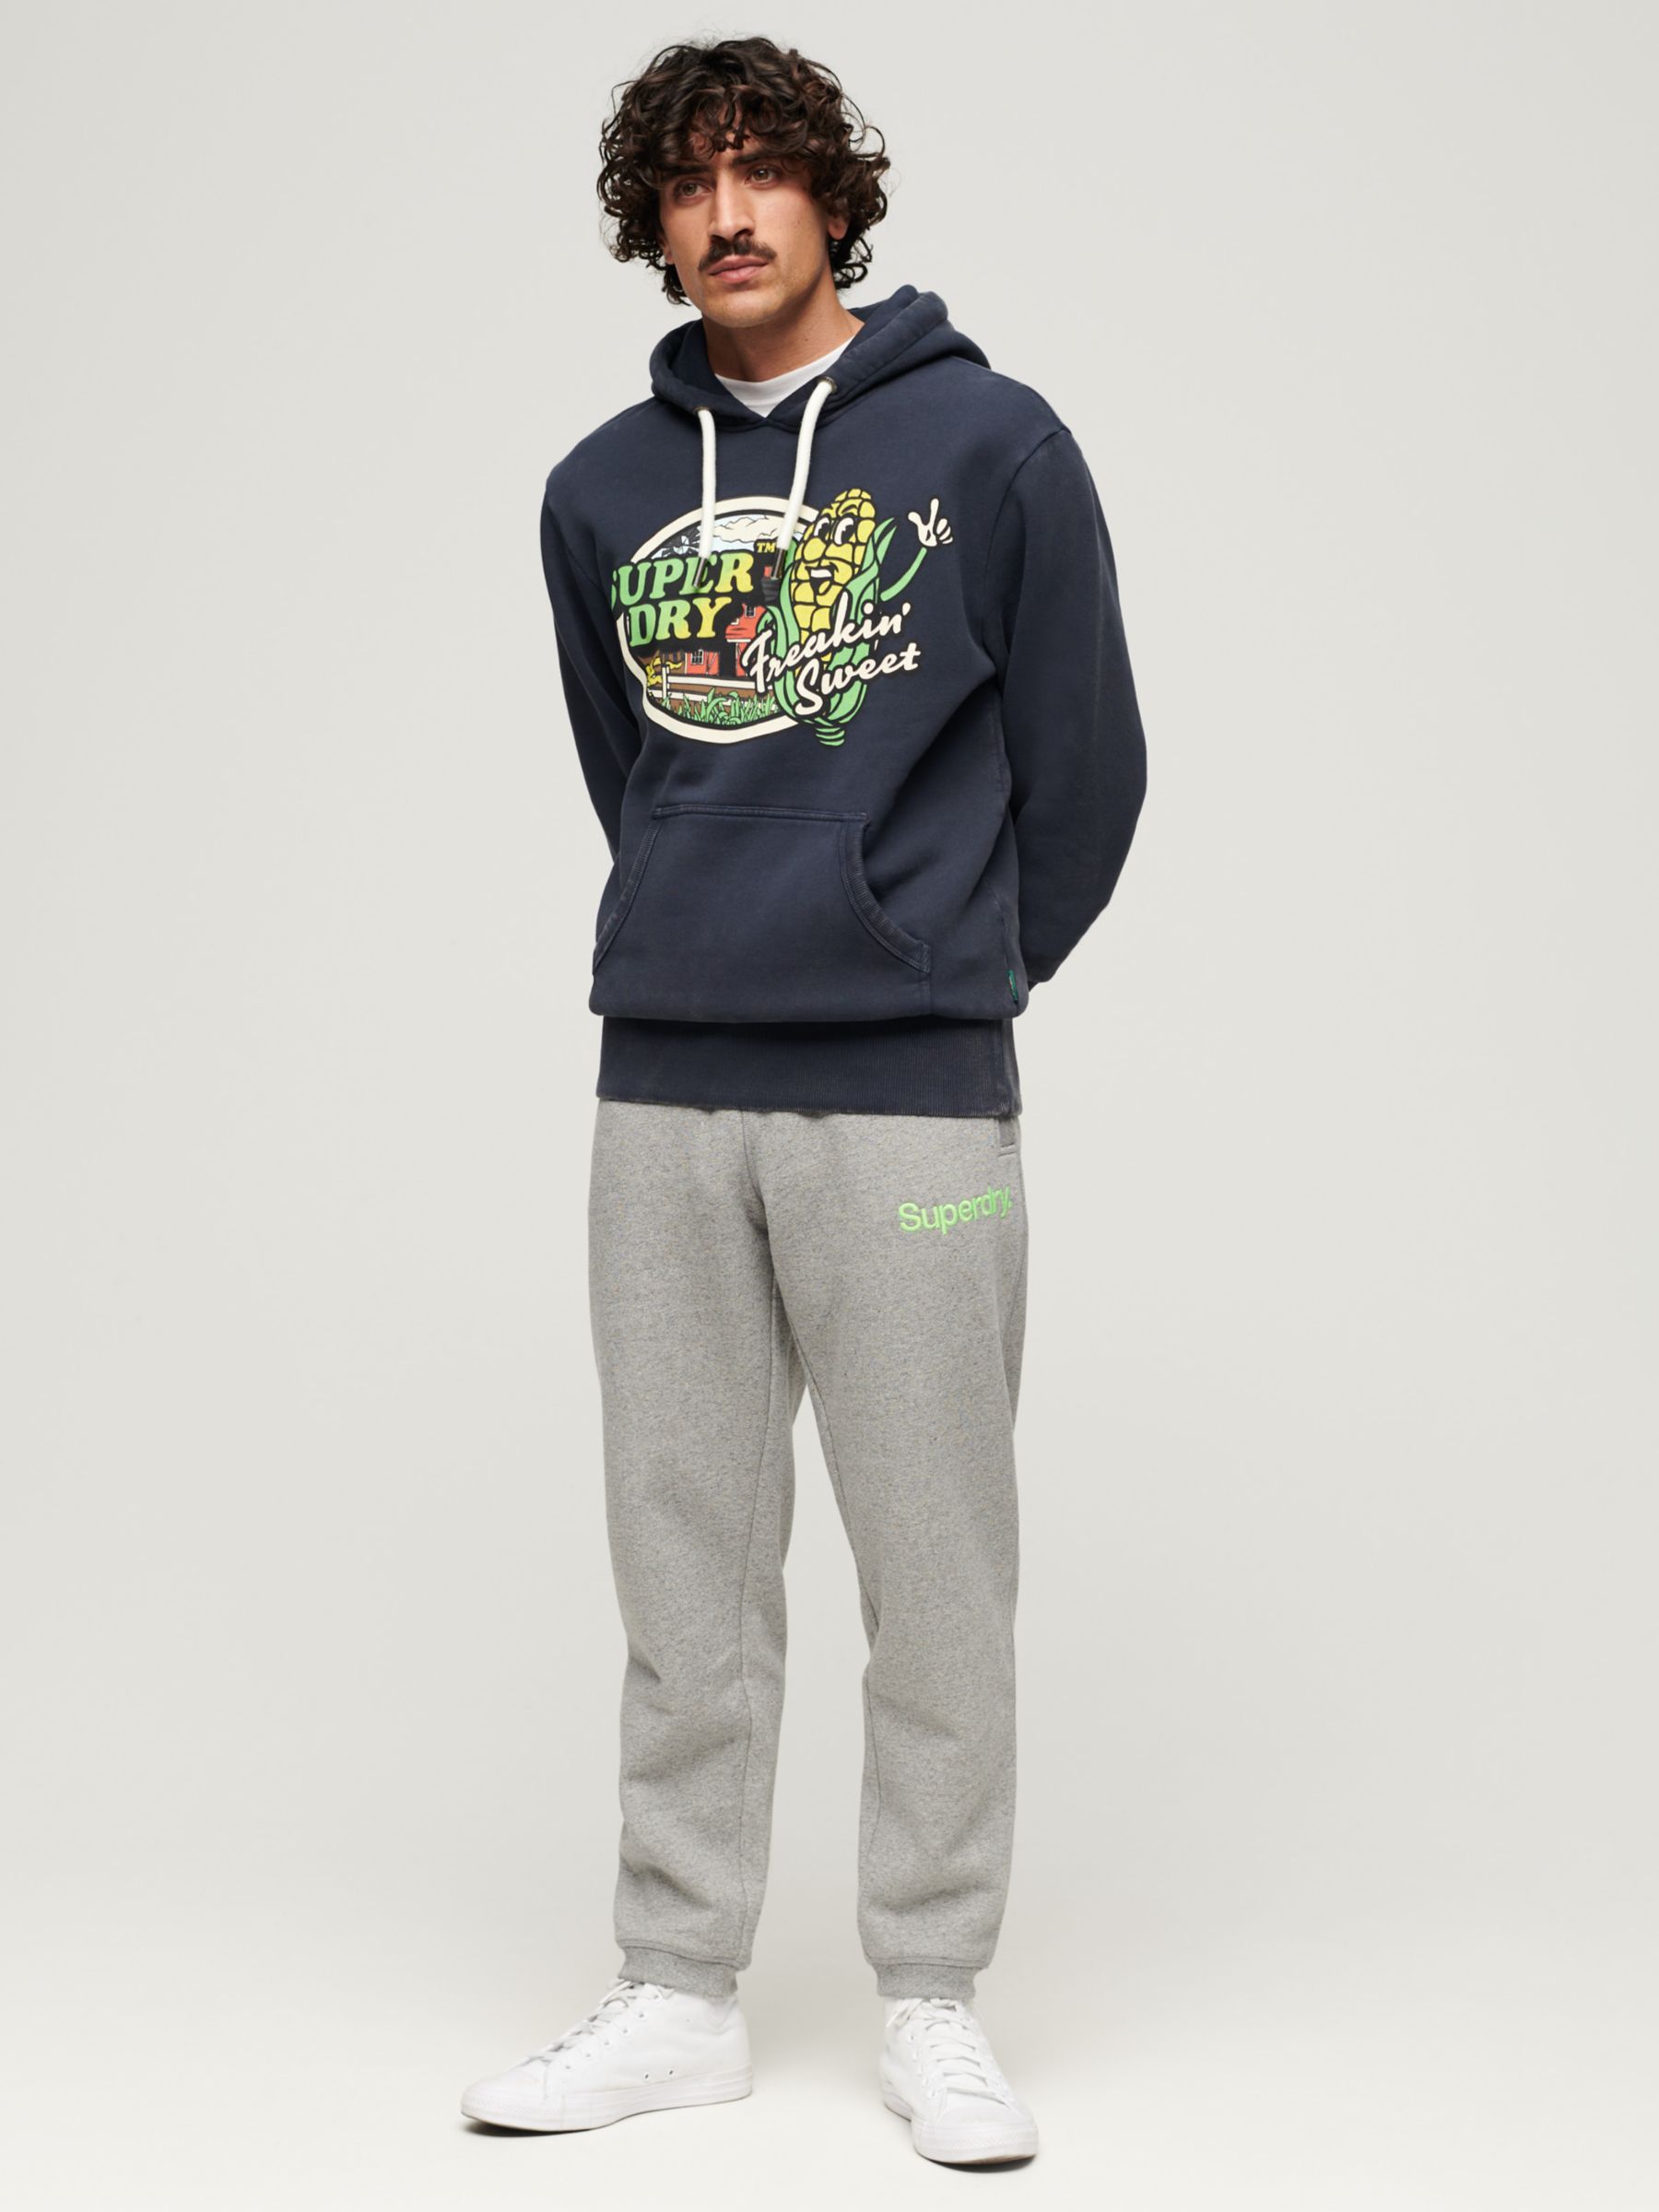 Buy Superdry Cor Logo Classic Wash Joggers, True Grit Online at johnlewis.com